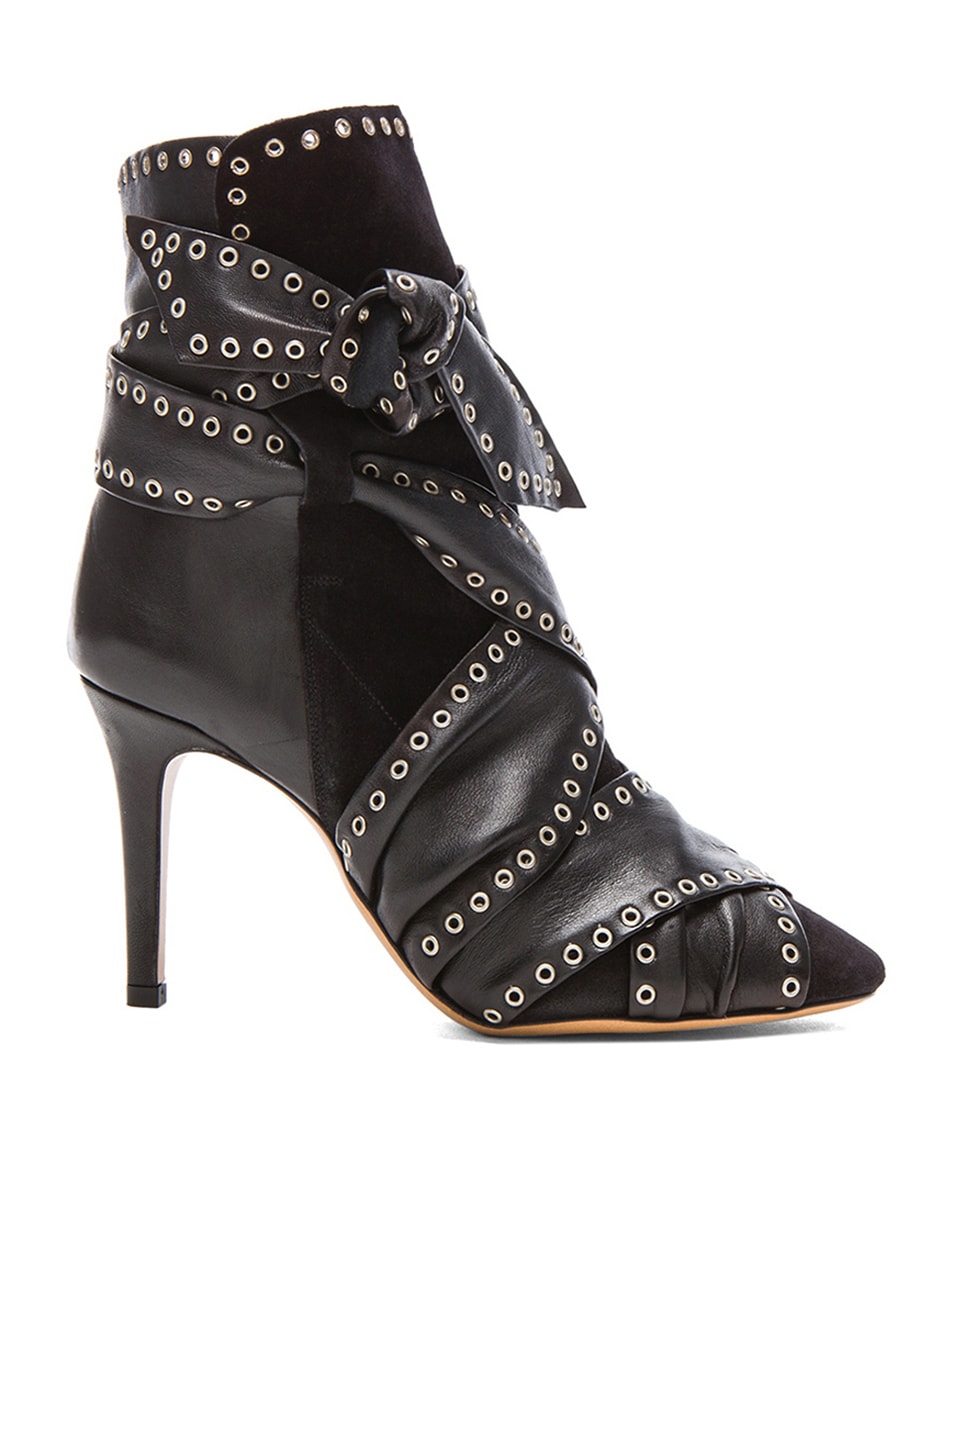 Image 1 of Isabel Marant Alease Studded Booties in Black